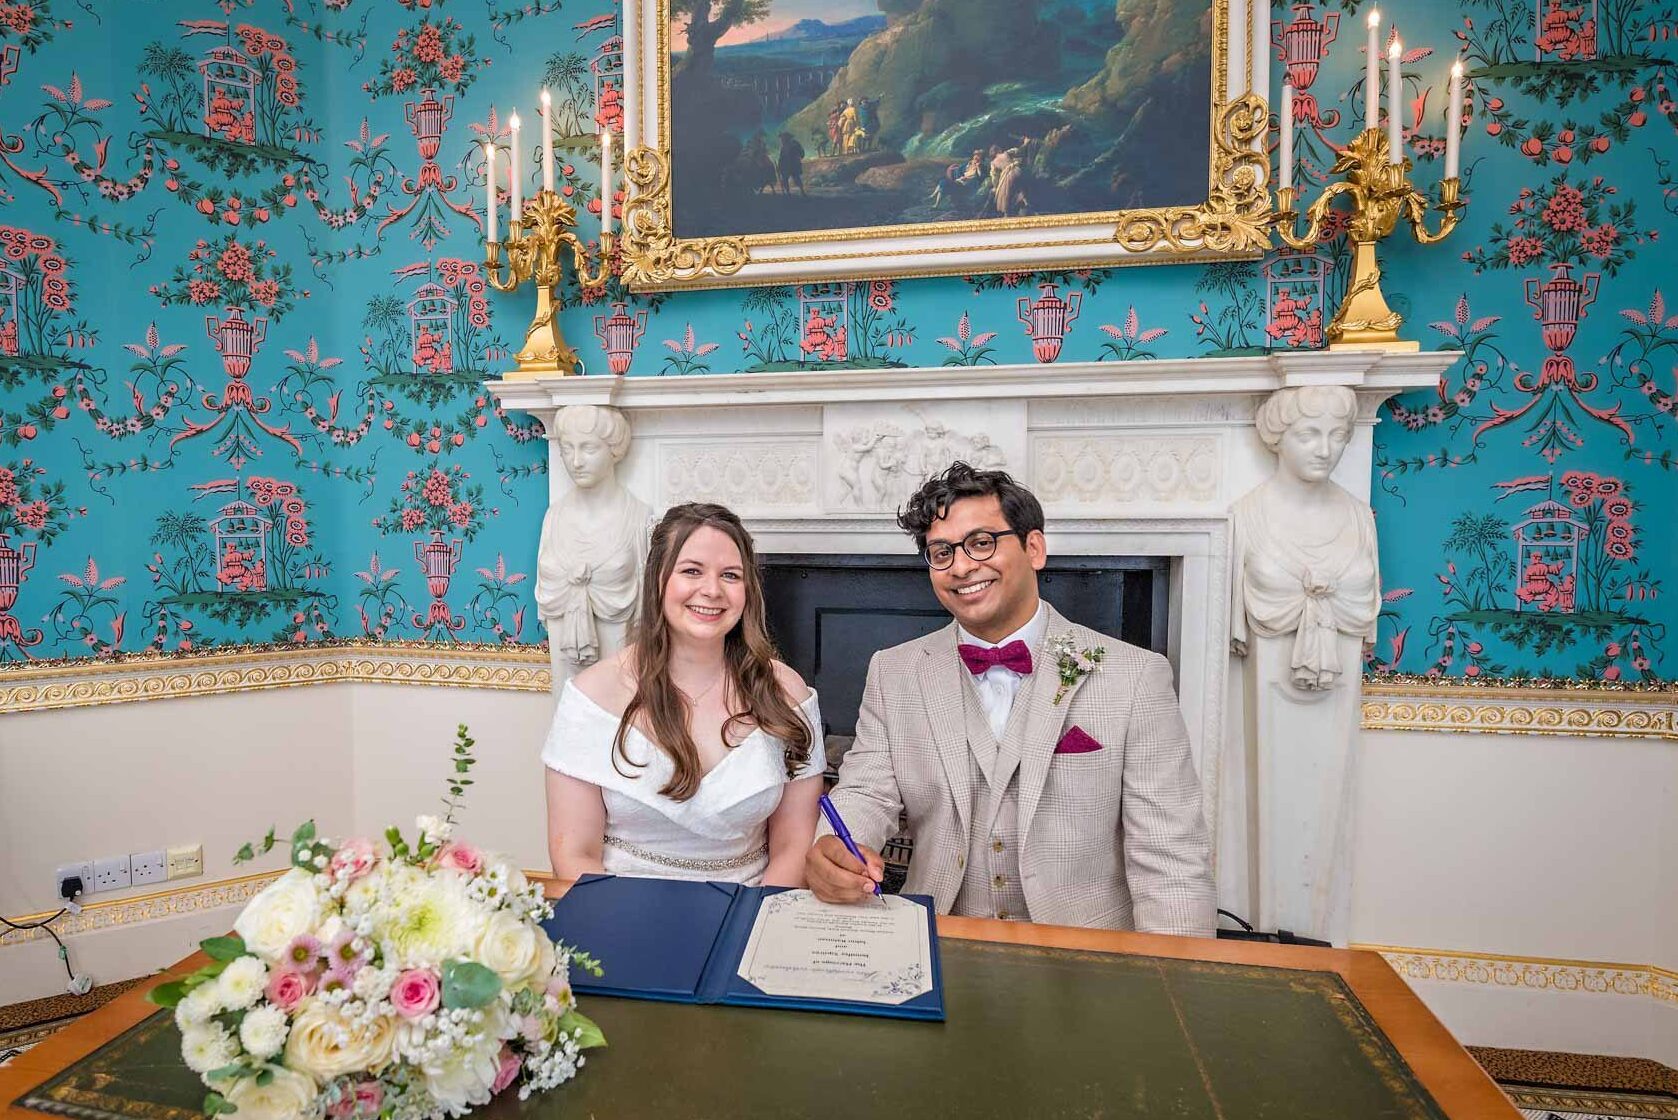 The happy newlyweds smiling with dummy register after their wedding ceremony in the Salon, Danson House